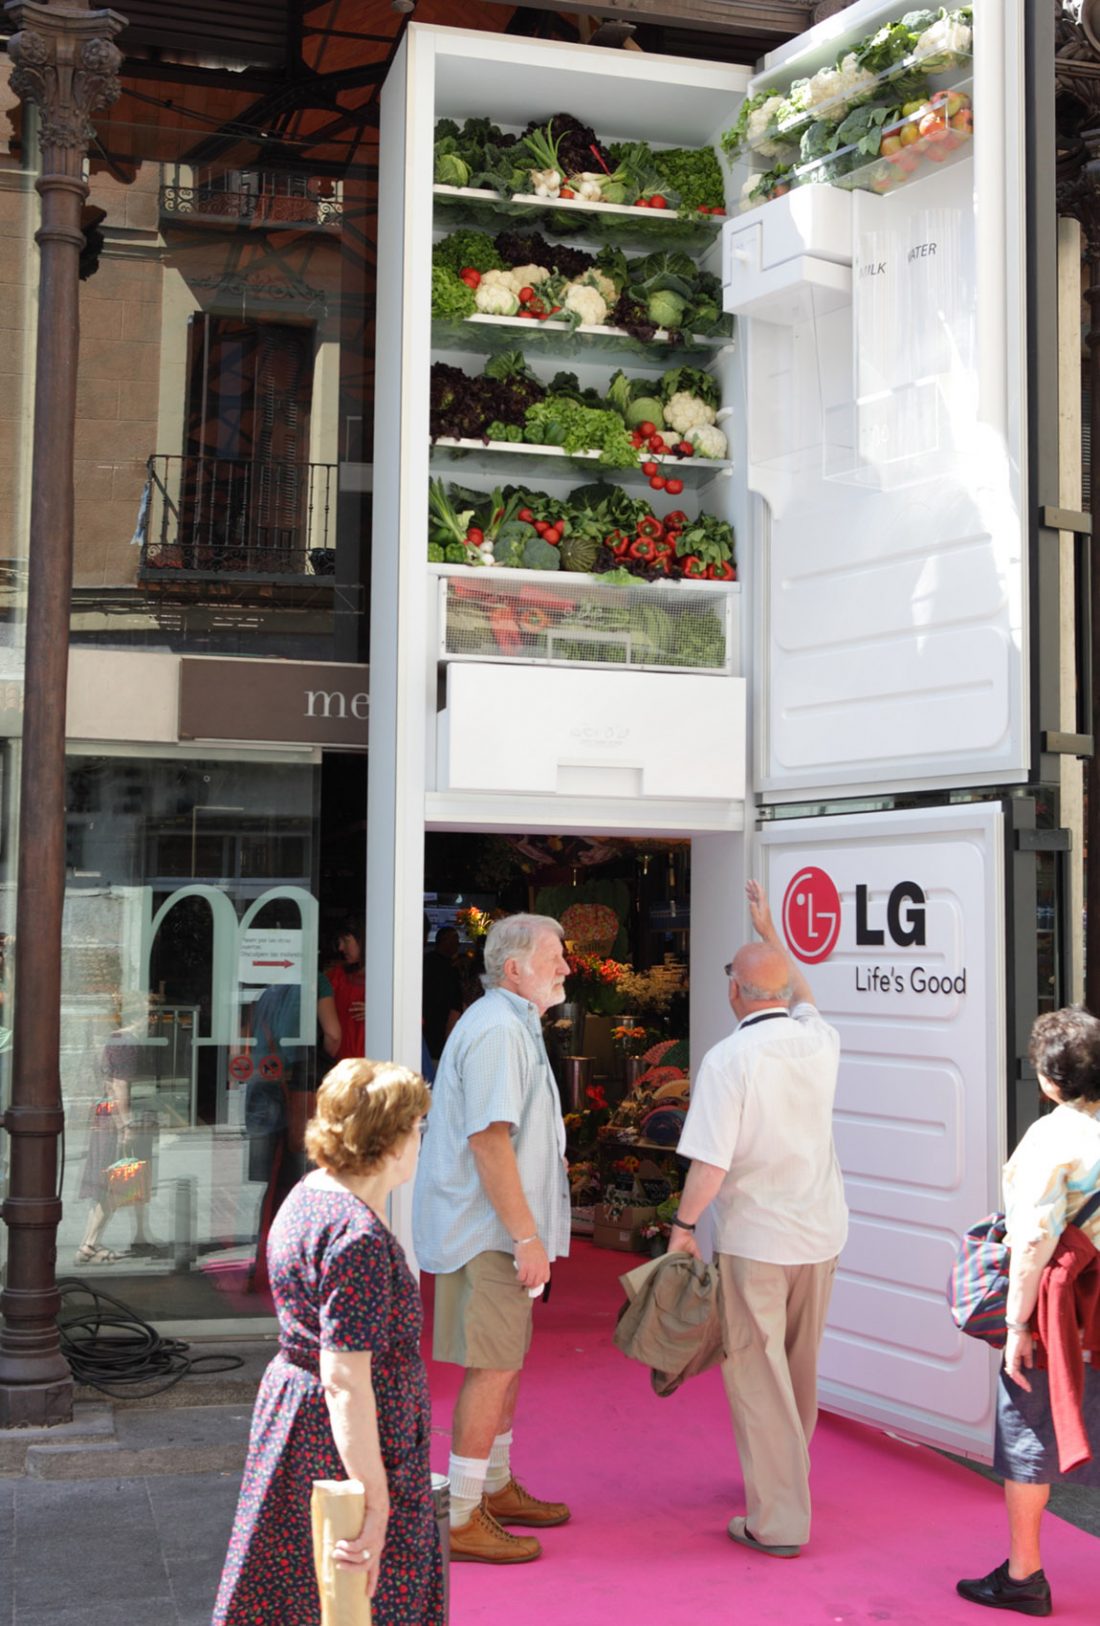 The store front’s entrance is modified to resemble a giant version of LG’s refrigerator, to the amazement of passersby.